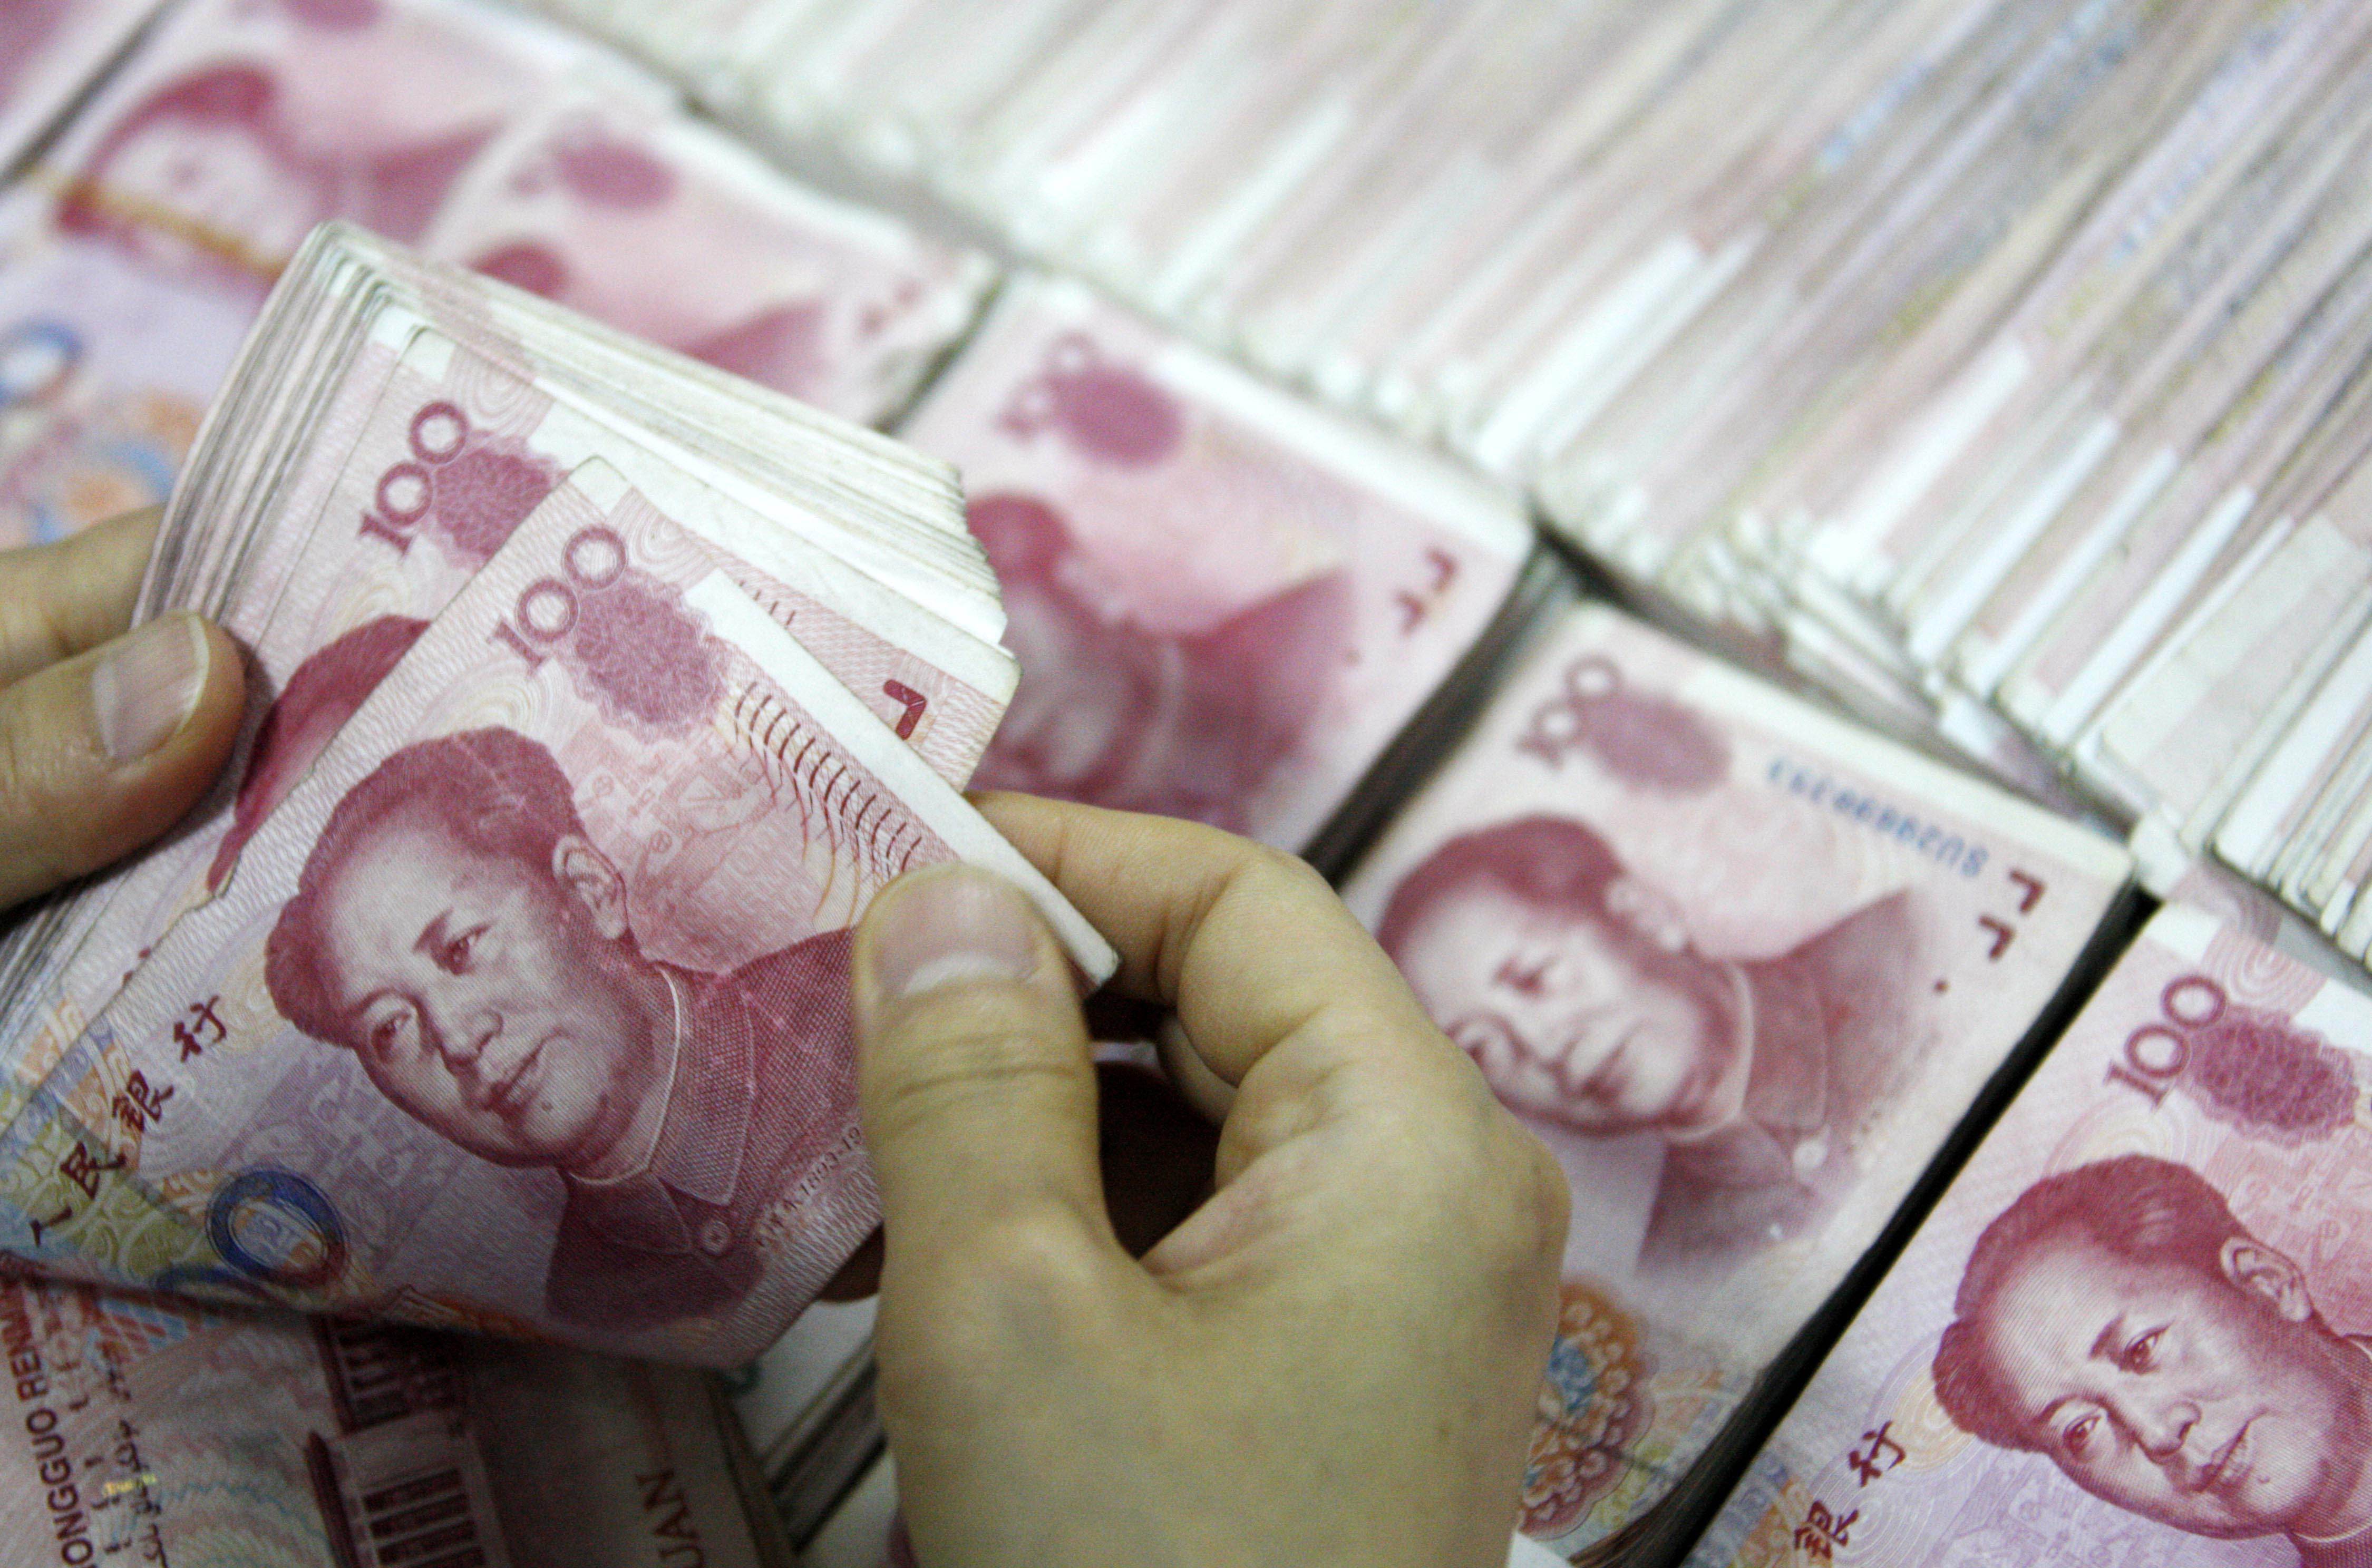 China's yuan slipped back on Monday after US Federal Reserve chair Janet Yellen said an interest rate increase is on track this year. Photo: AFP